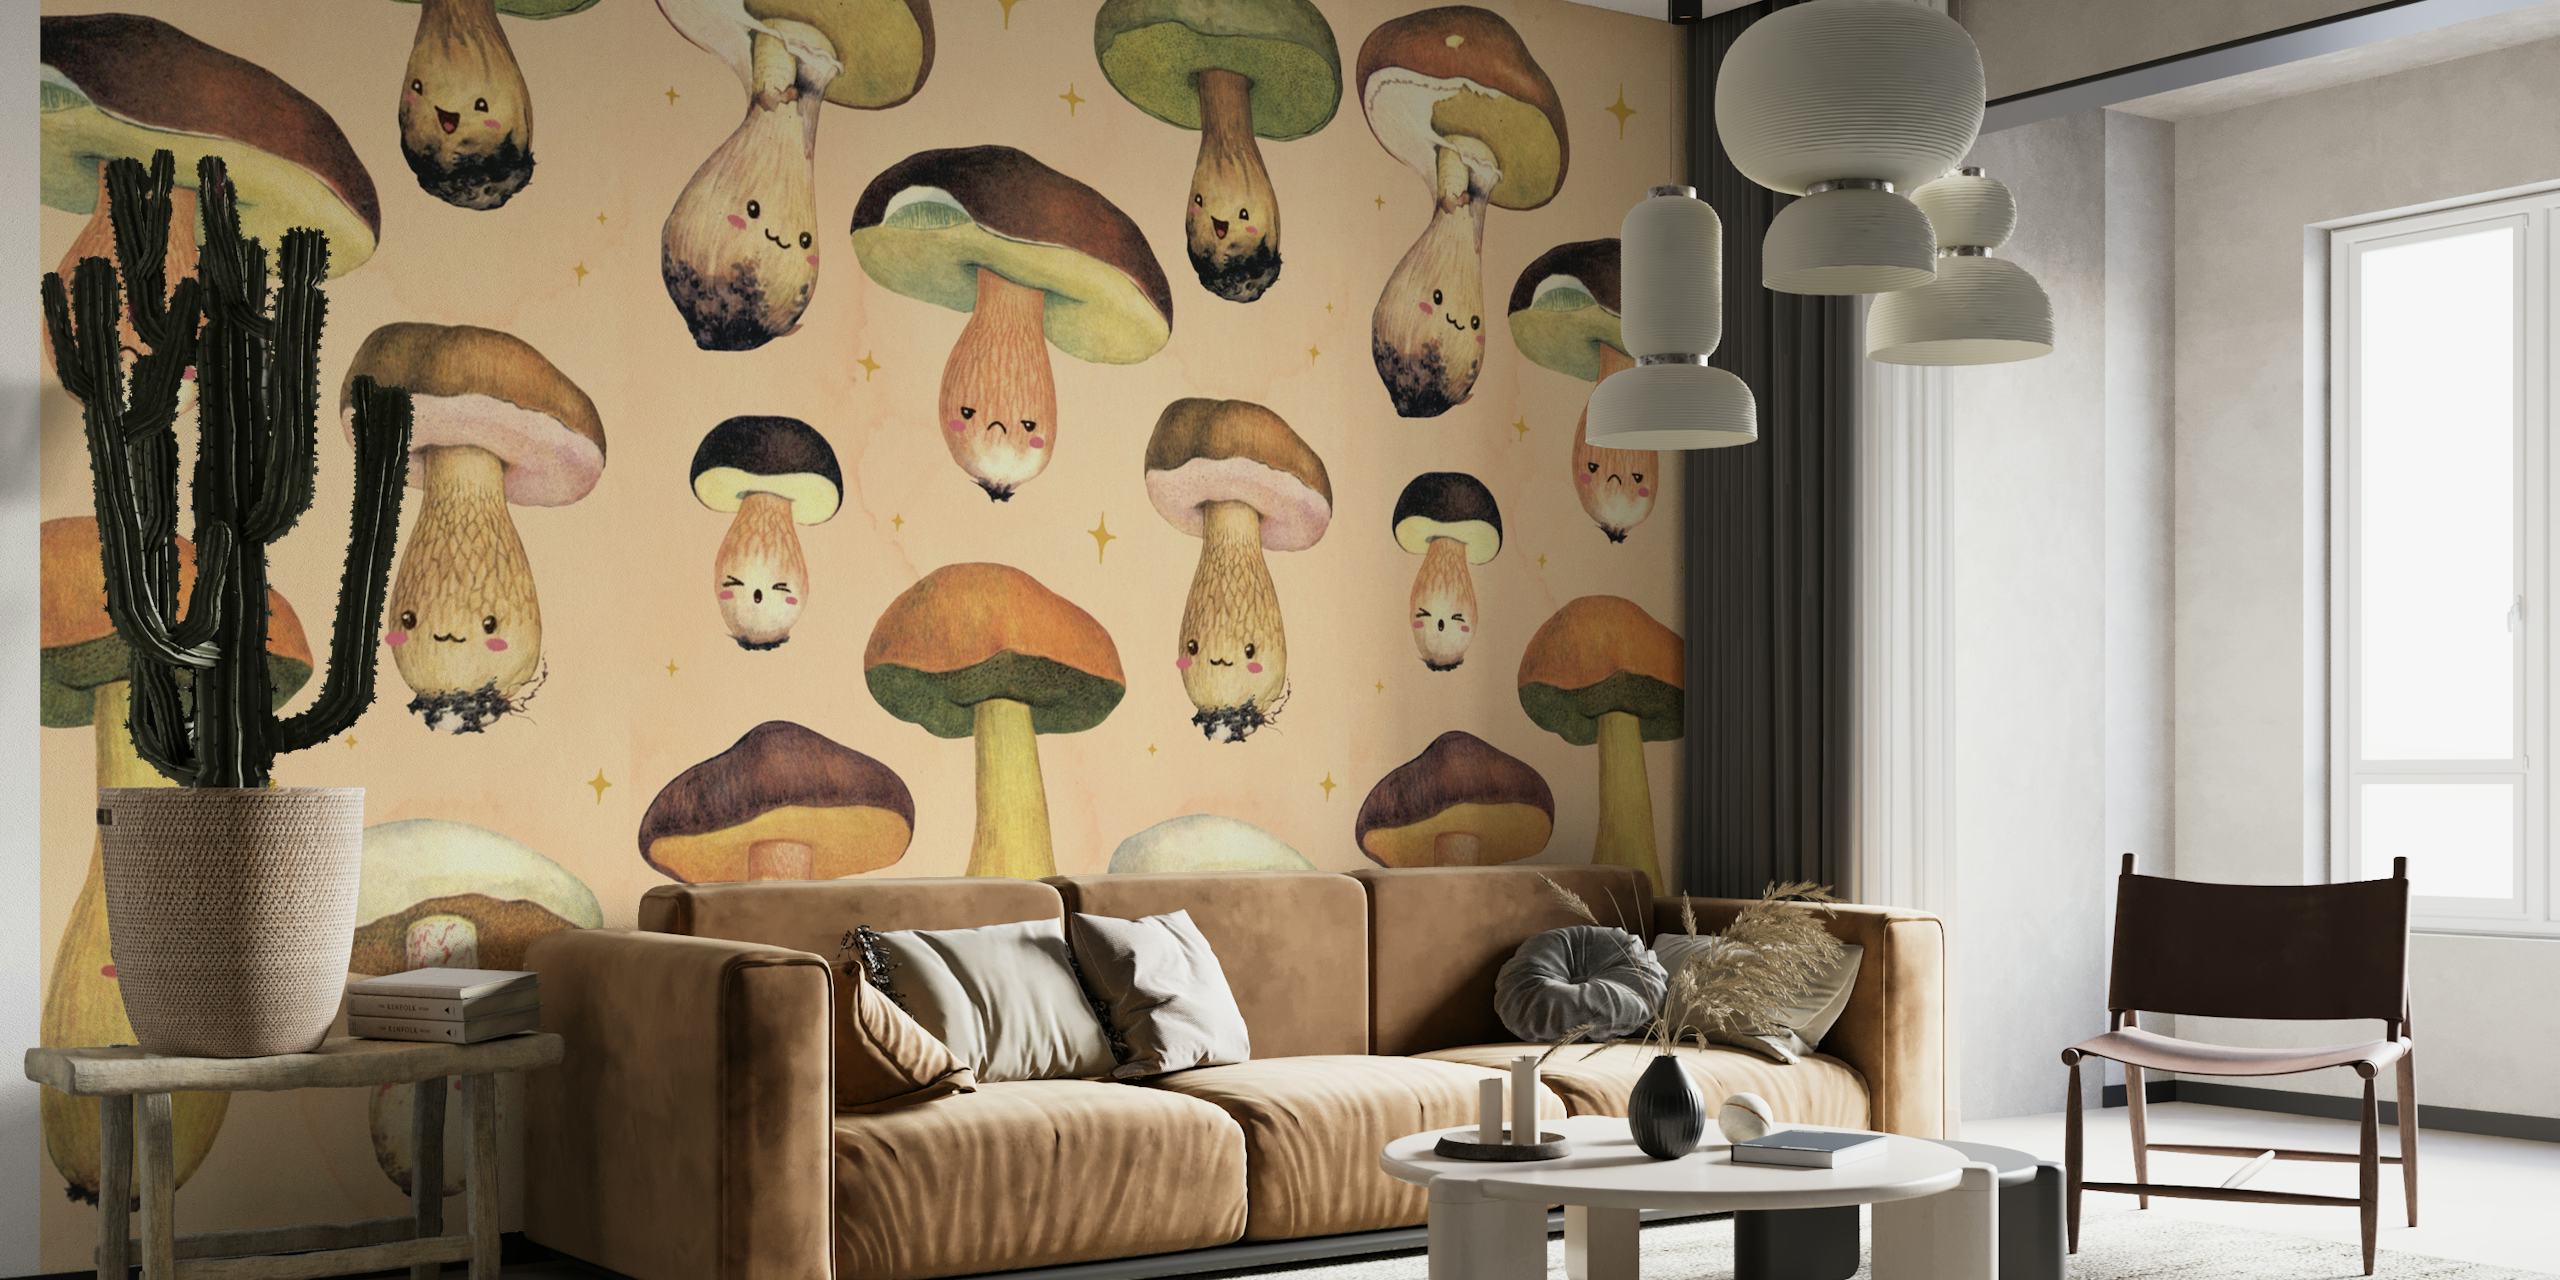 Illustrated Happy Forest Mushroom wall mural with whimsical mushroom characters on a warm background